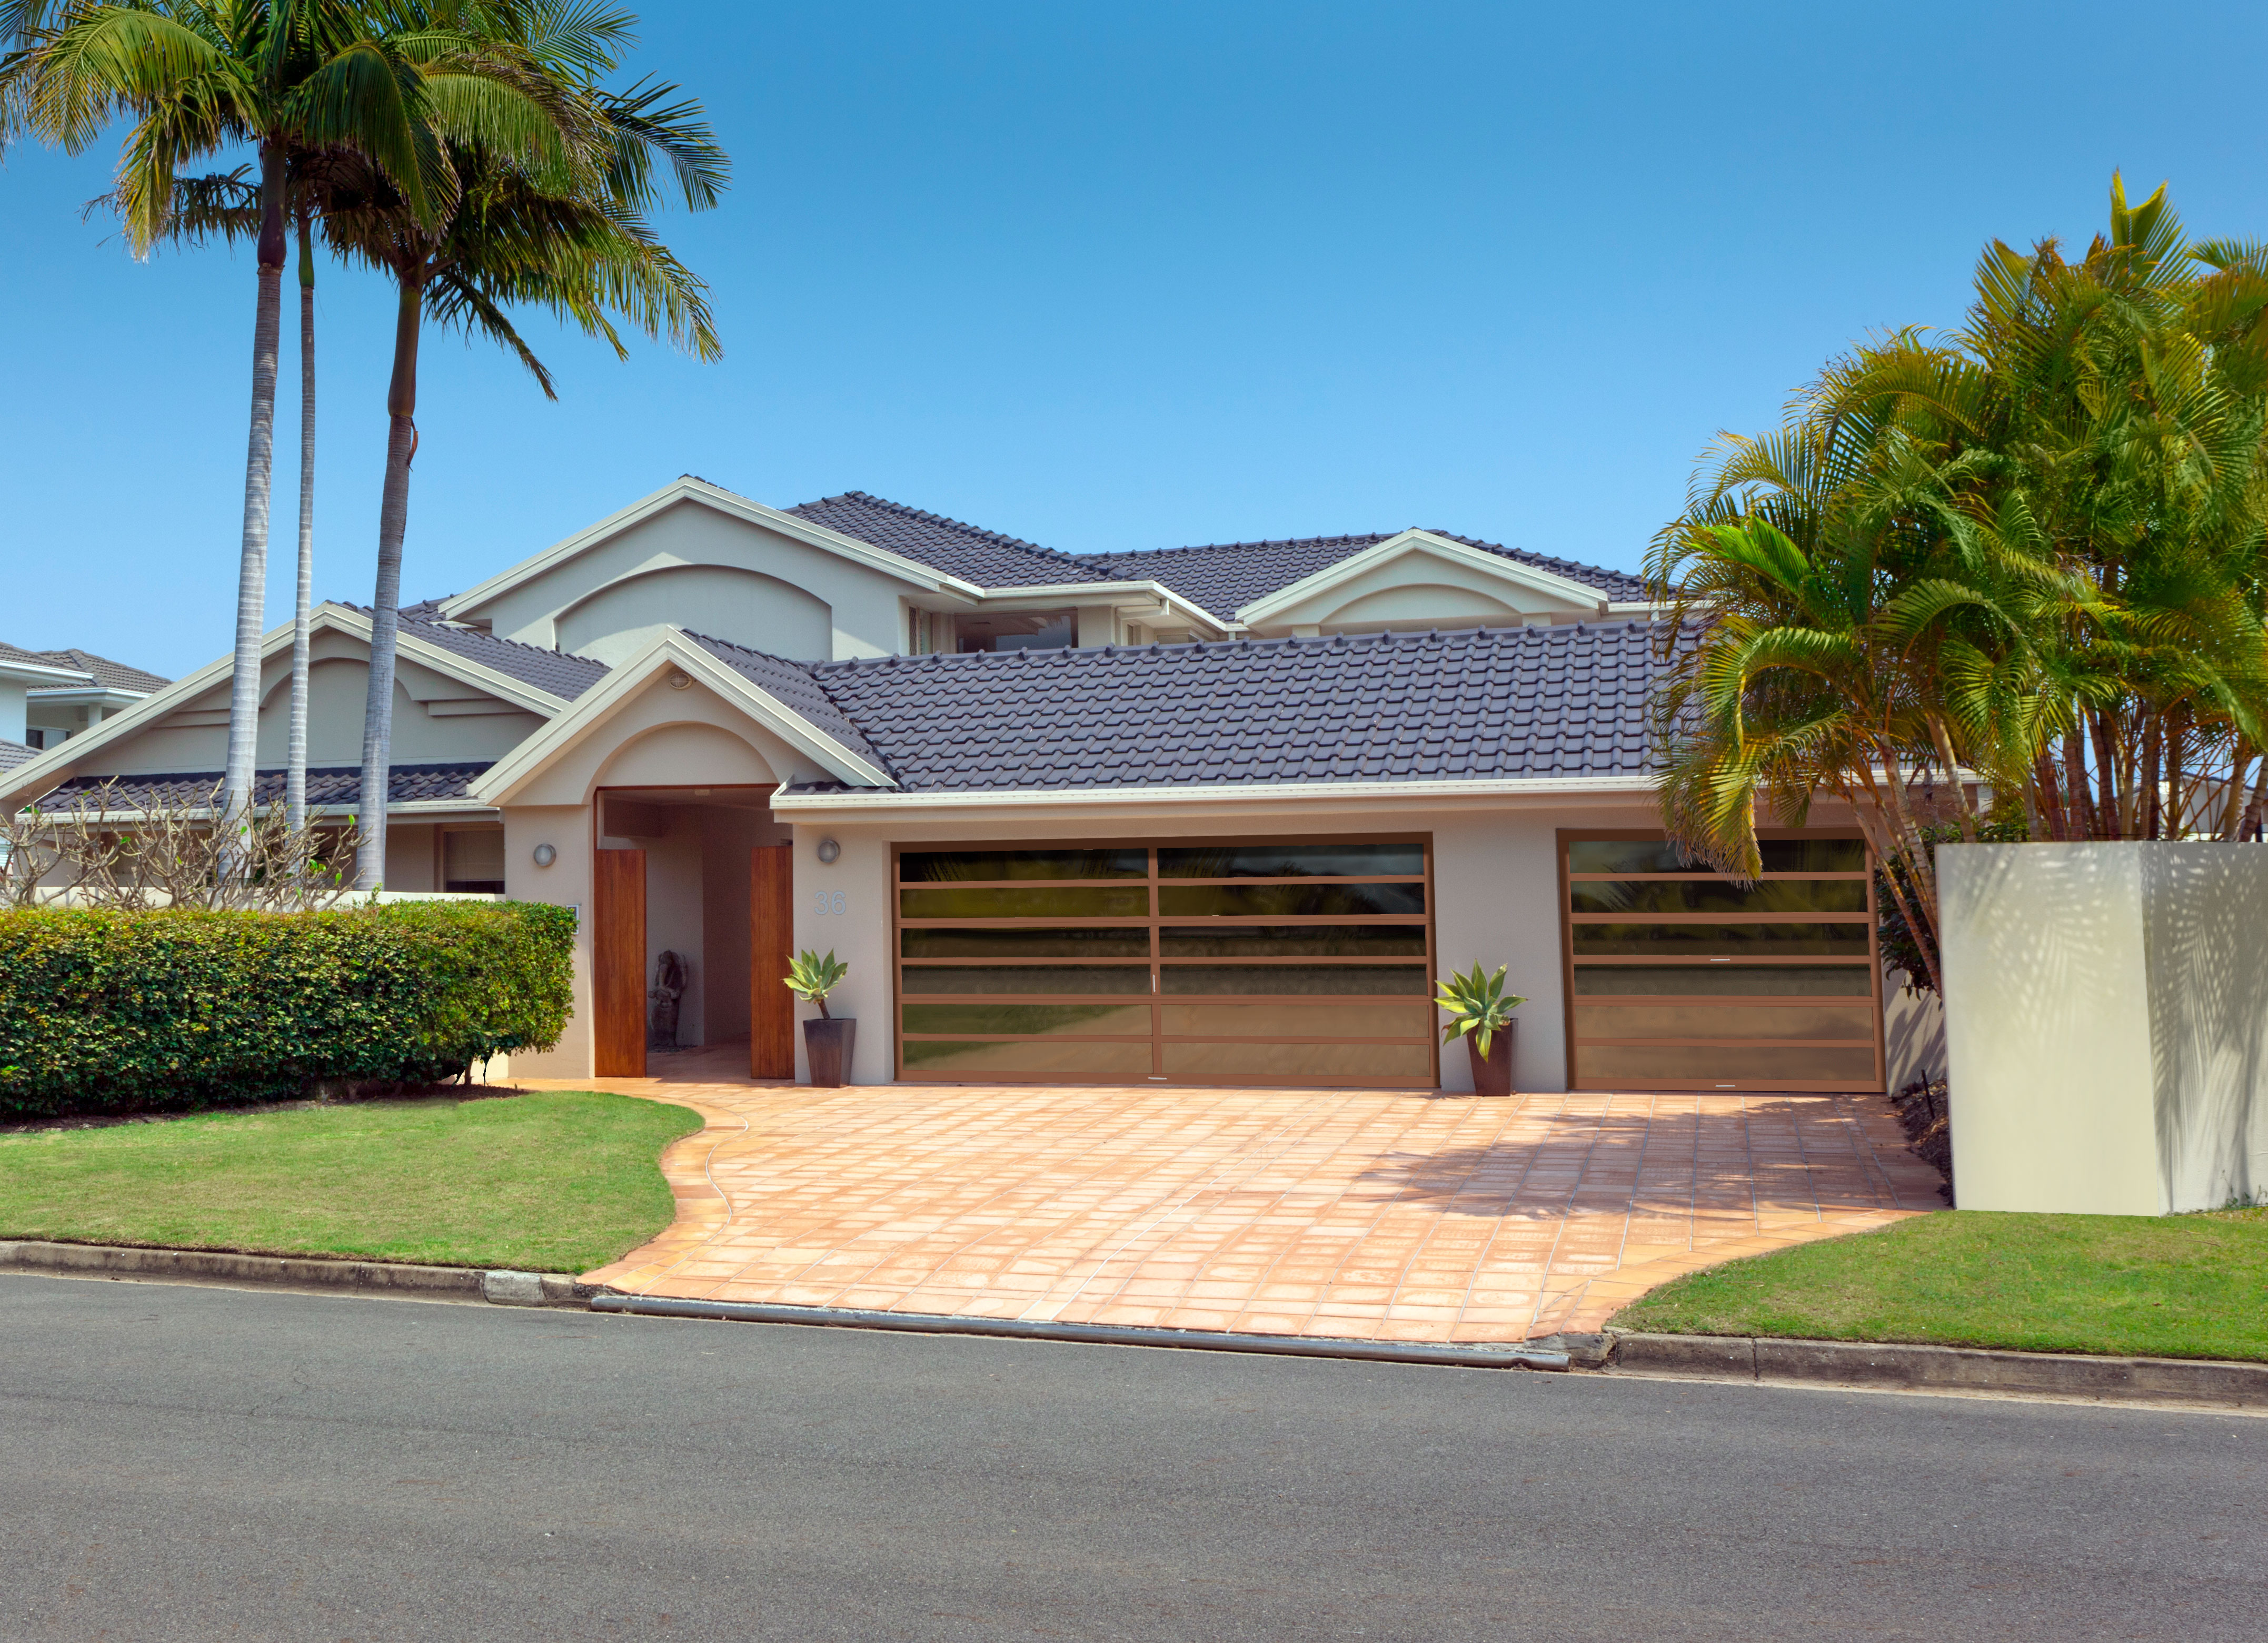 Find the Perfect Garage Door to Fit Your Home Style